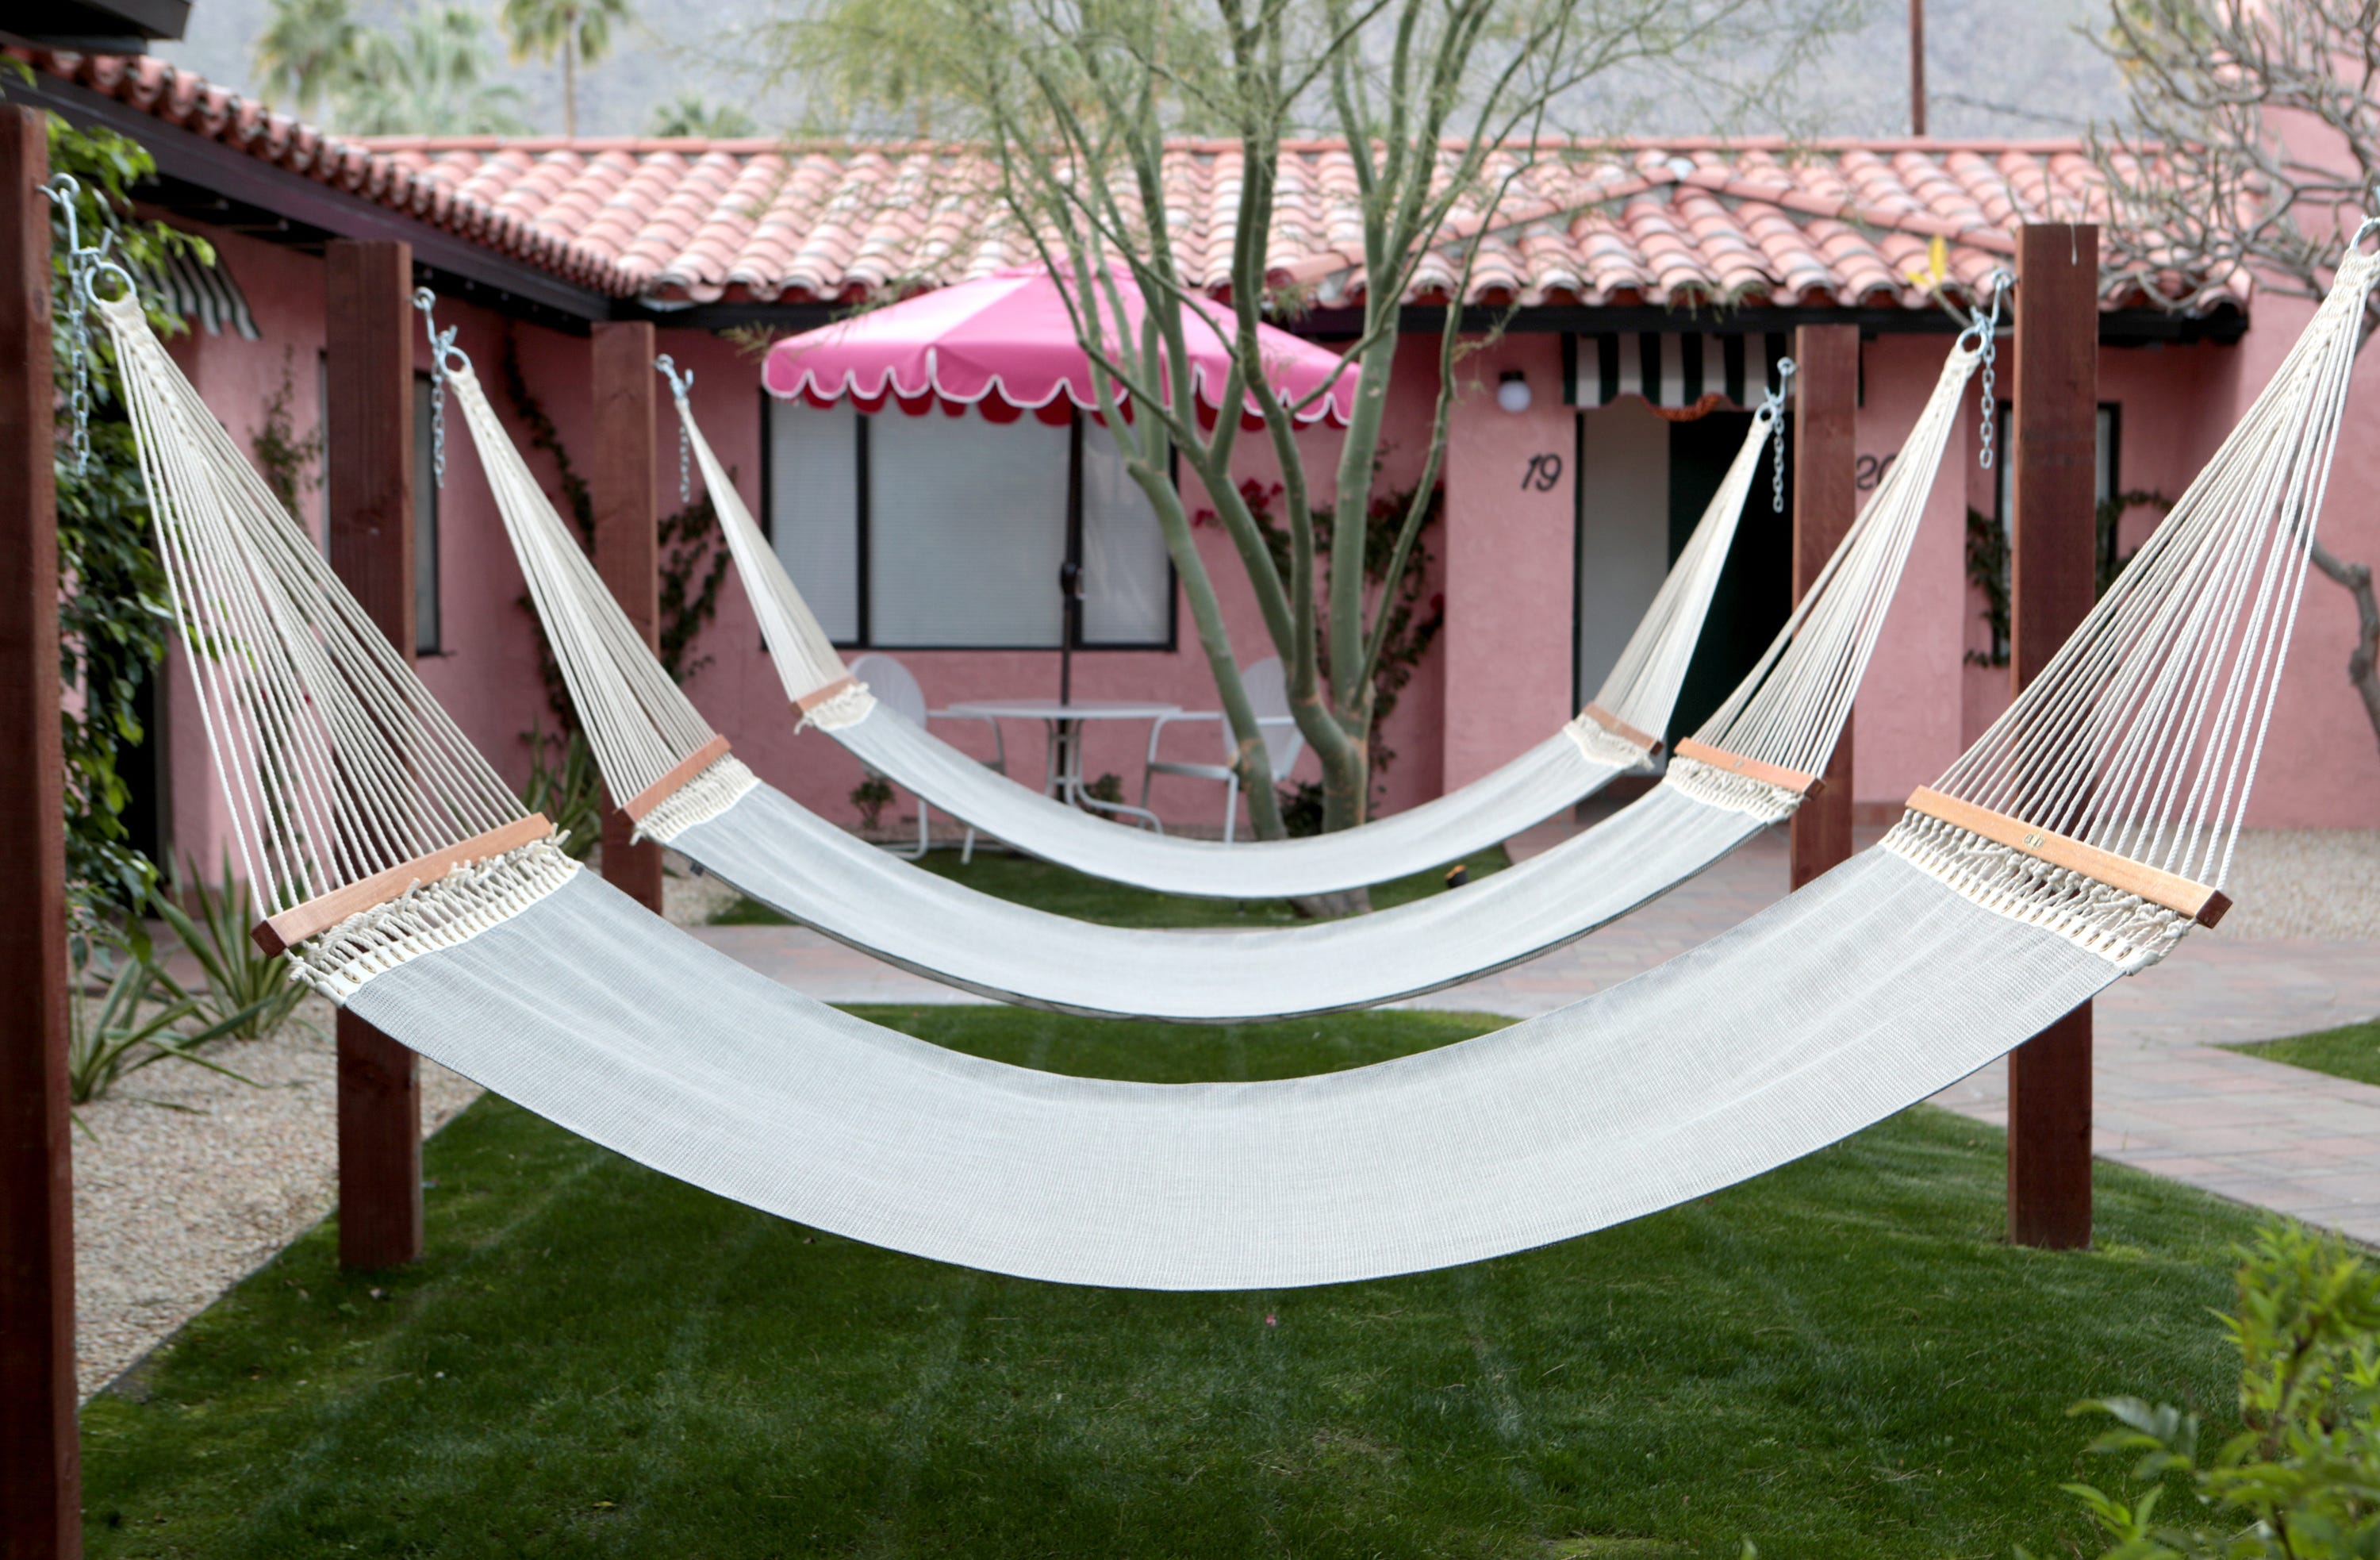 Hammocks at the boutique hotel Les Cactus in Palm Springs, Calif., on January 30, 2020.